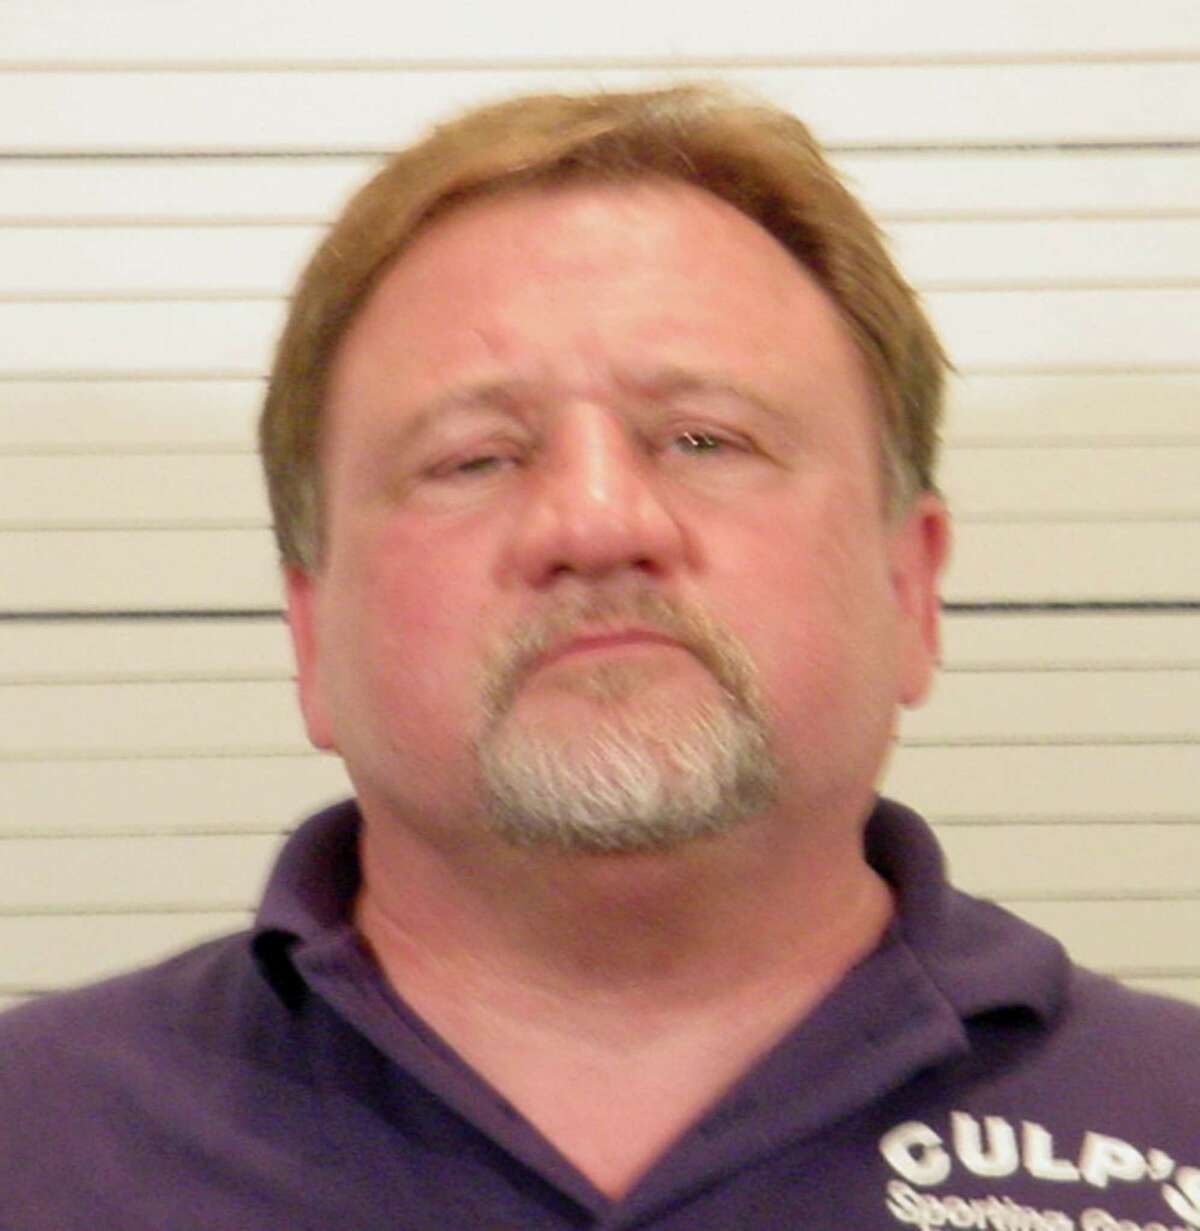 This 2006 photo provided by the St. Clair County, Ill., Sheriff's Department shows James T. Hodgkinson. Officials said Hodgkinson has been identified as the man who opened fire on Republican lawmakers at a congressional baseball practice Wednesday June 14, 2017 in Alexandria, Va. (St. Clair County Illinois Sheriff's Department via AP)